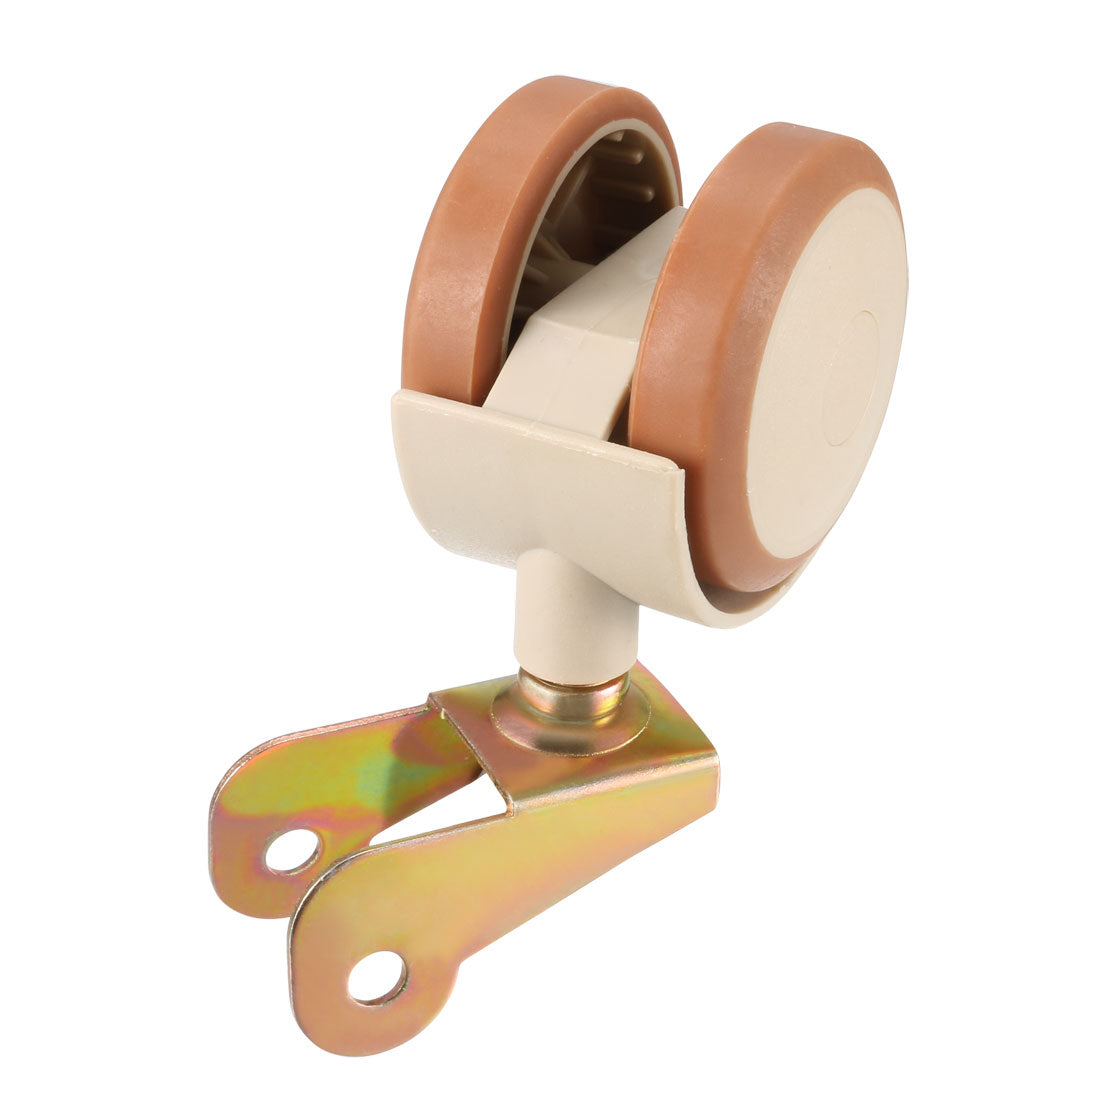 Uxcell Uxcell 1.85 Inch Swivel Caster Wheels 20mm Width P-type Bracket Furniture Caster Twin Wheel Brown with Brake , 4pcs